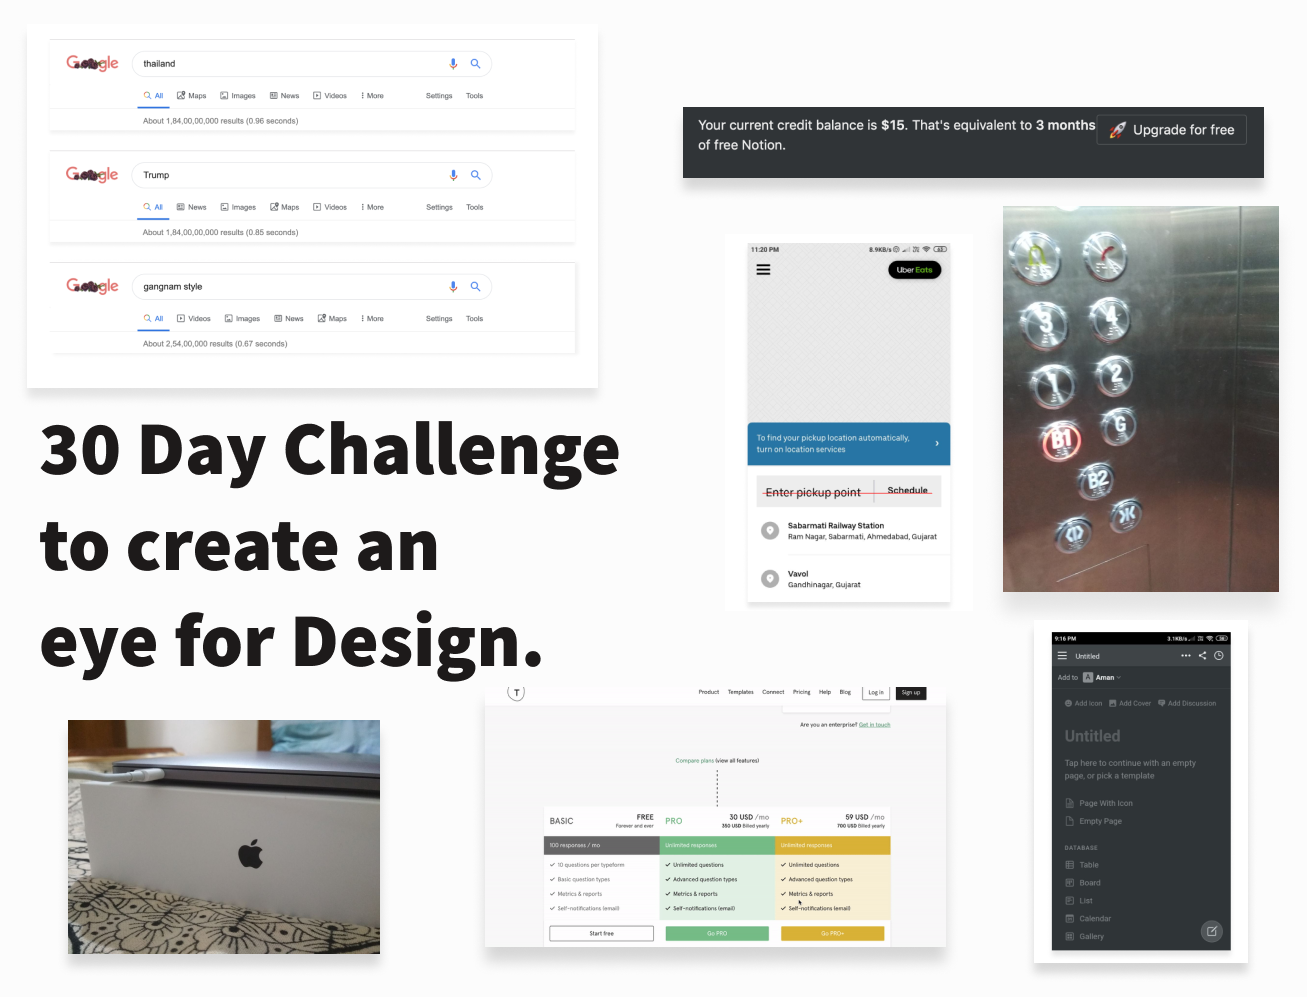 My 30 Design challenge to create an eye for Design.